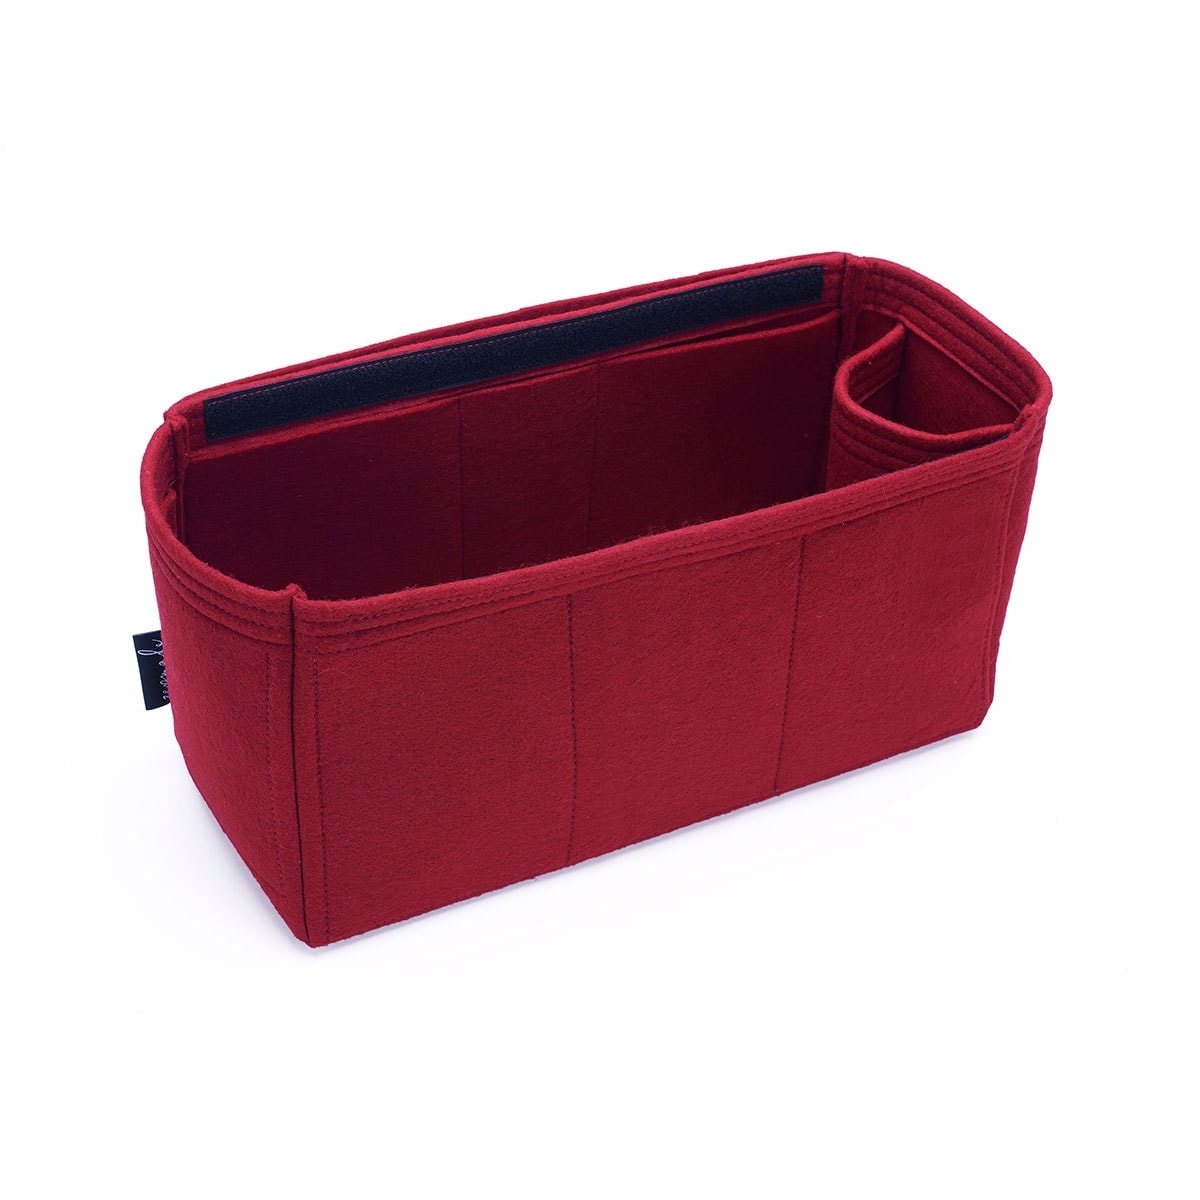 Felt Bag Organizer with Top-Closure Style for Louis Vuitton